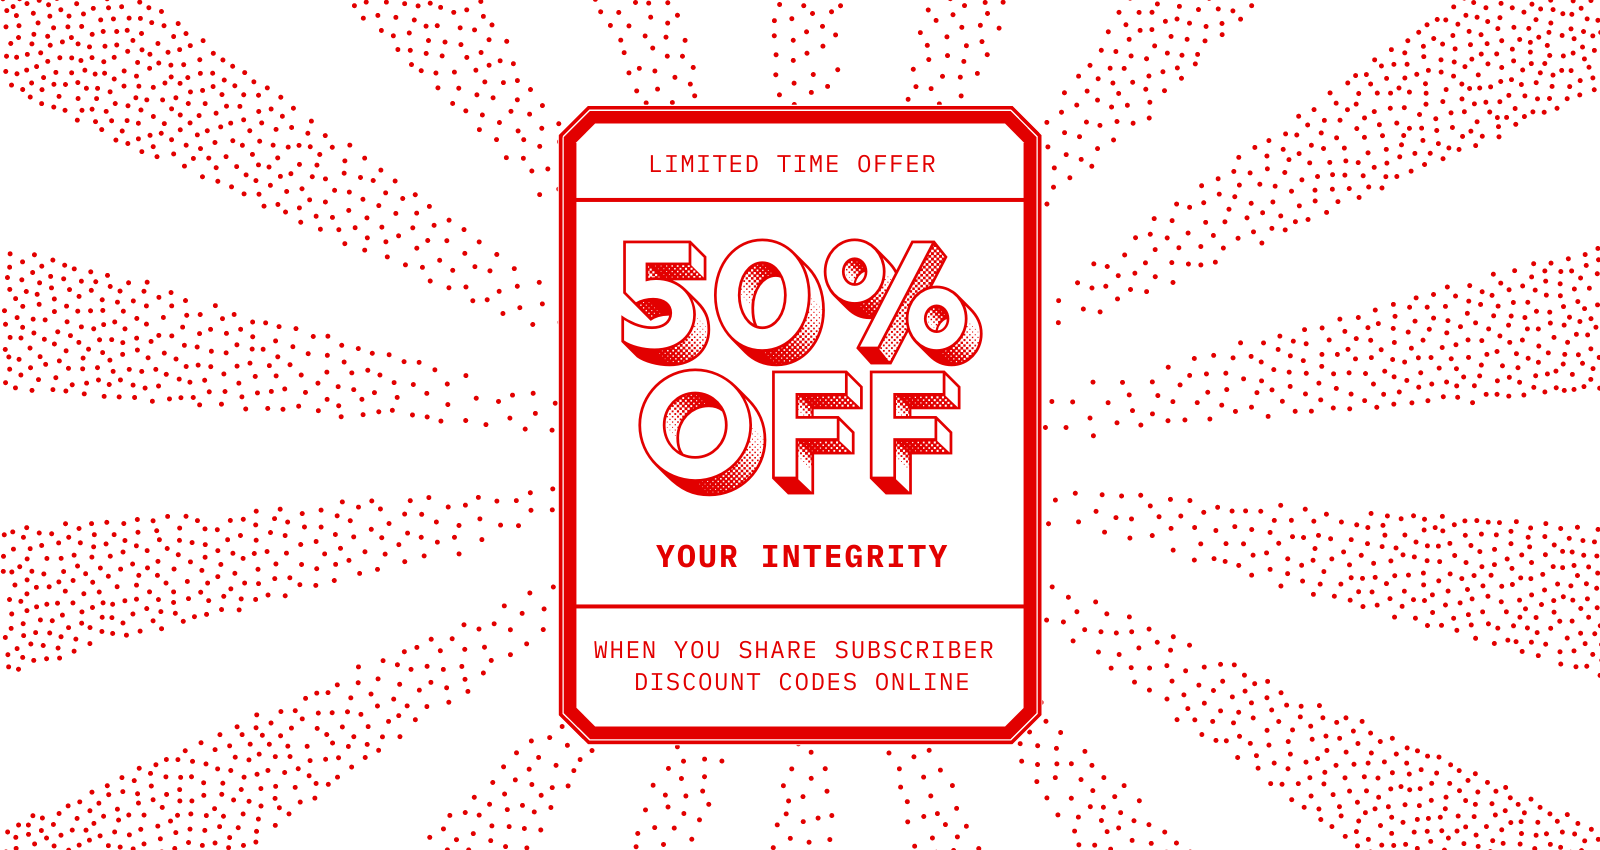 Fake ad reads, “Limited time offer. 50 percent off your integrity when you share subscriber discount codes online.”